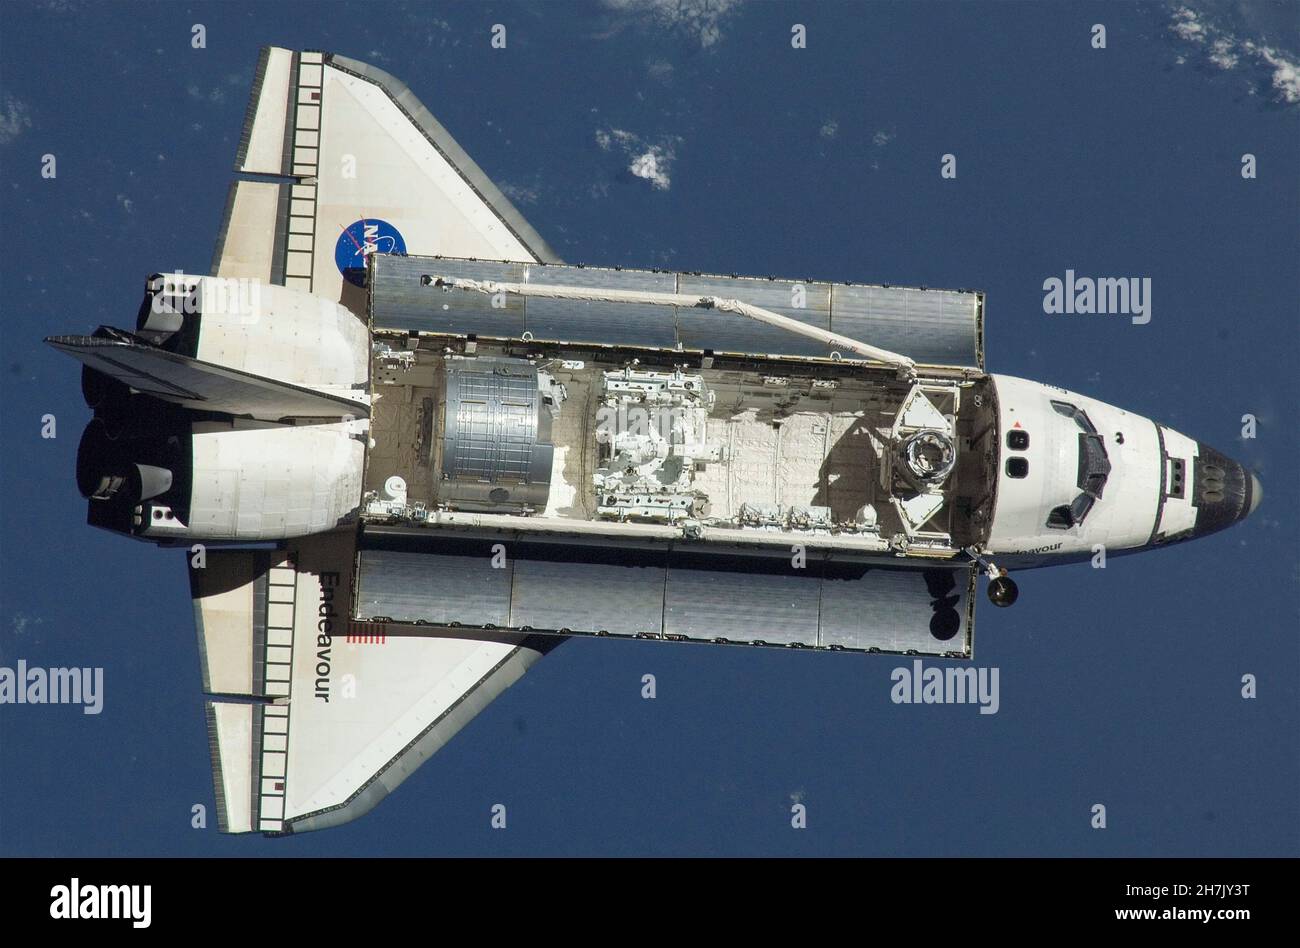 SPACE SHUTTLE ENDEAVOUR in orbit in 2008. Shown here with the load bay open during STS-123 Endeavour flew 25 missions. Photo: NASA Stock Photo